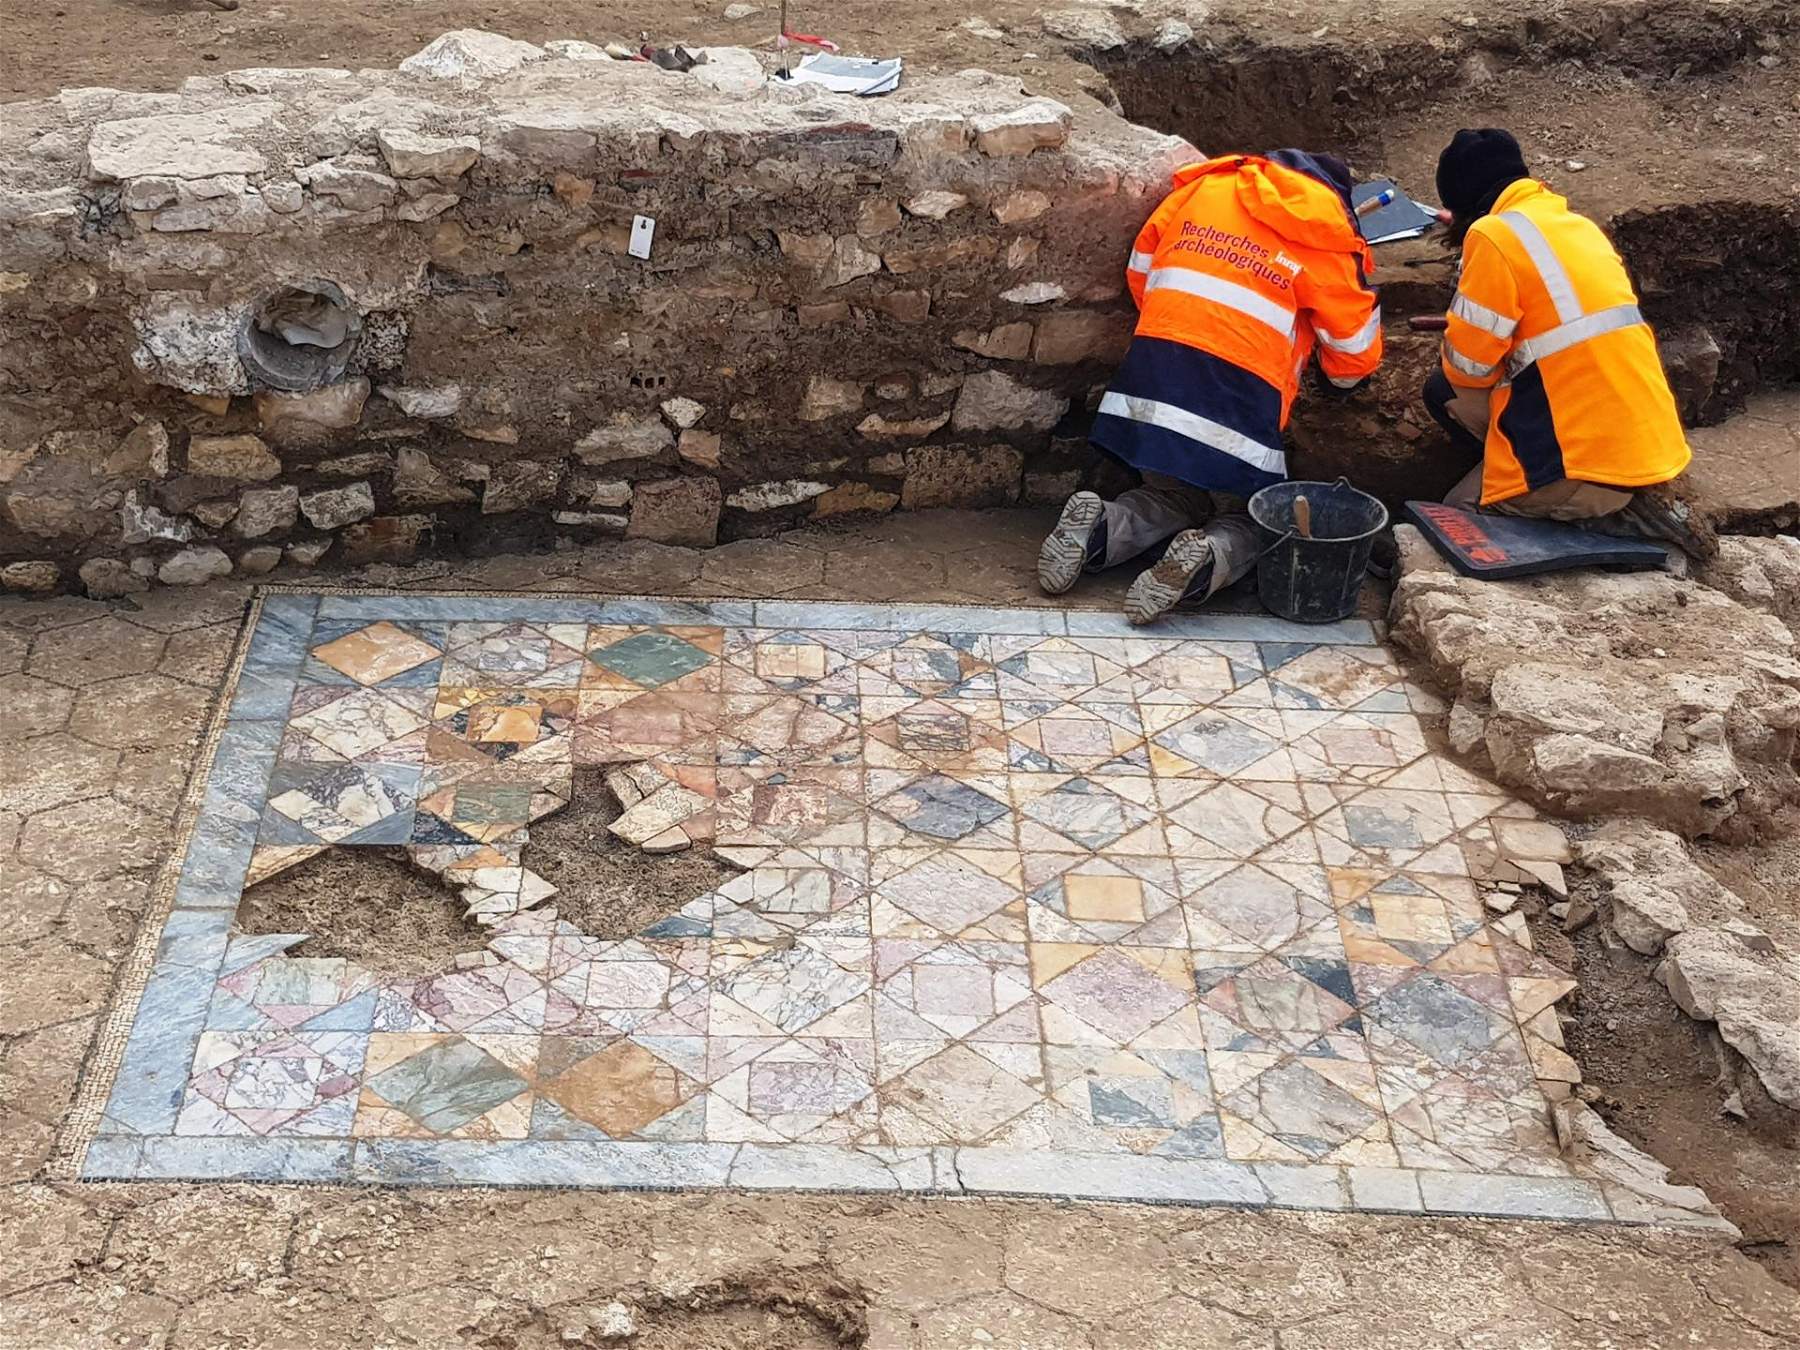 France, major archaeological discovery in NÃ®mes: two rich Roman domus found